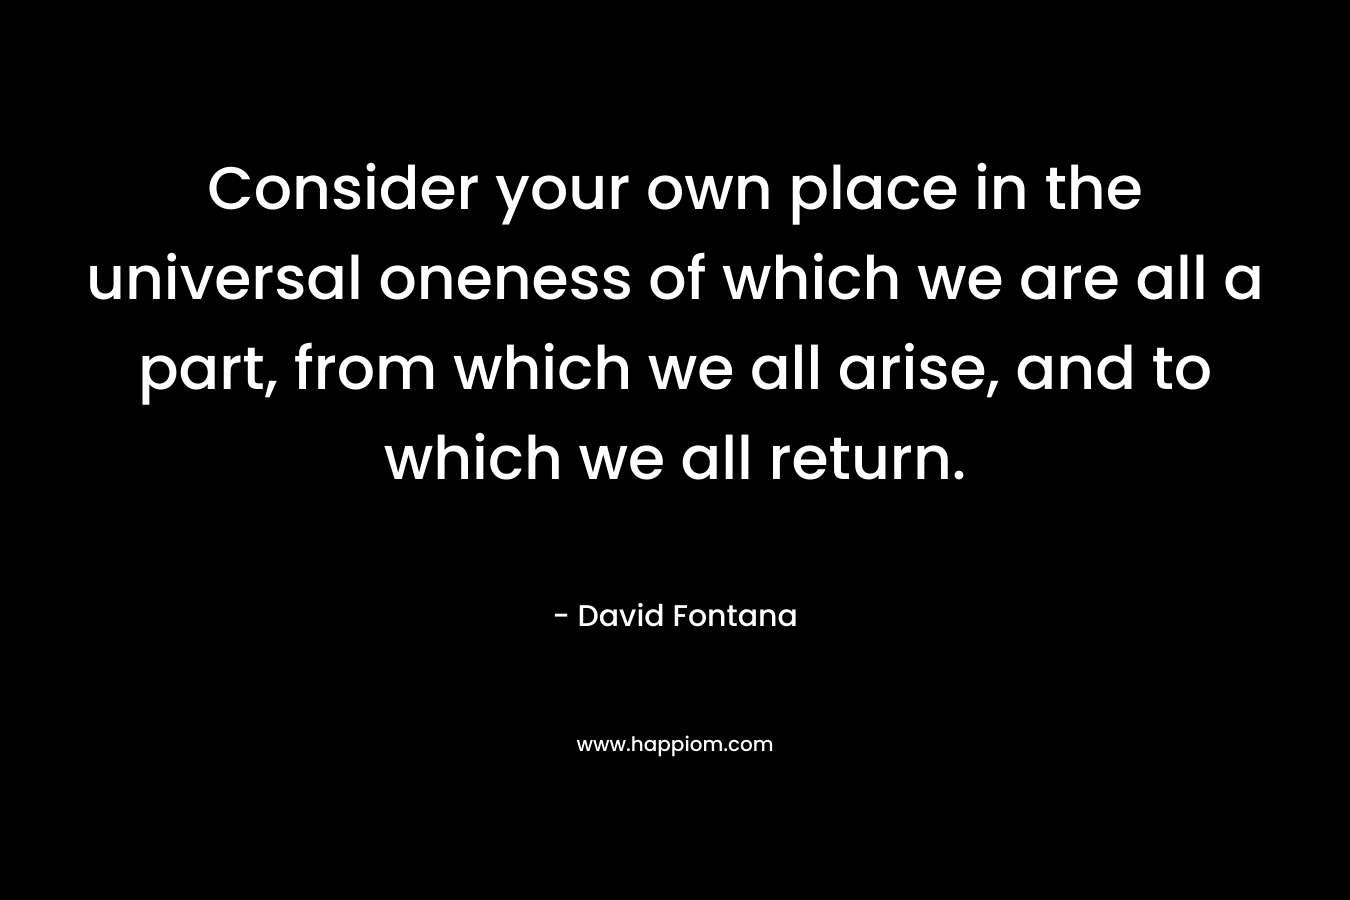 Consider your own place in the universal oneness of which we are all a part, from which we all arise, and to which we all return. – David Fontana